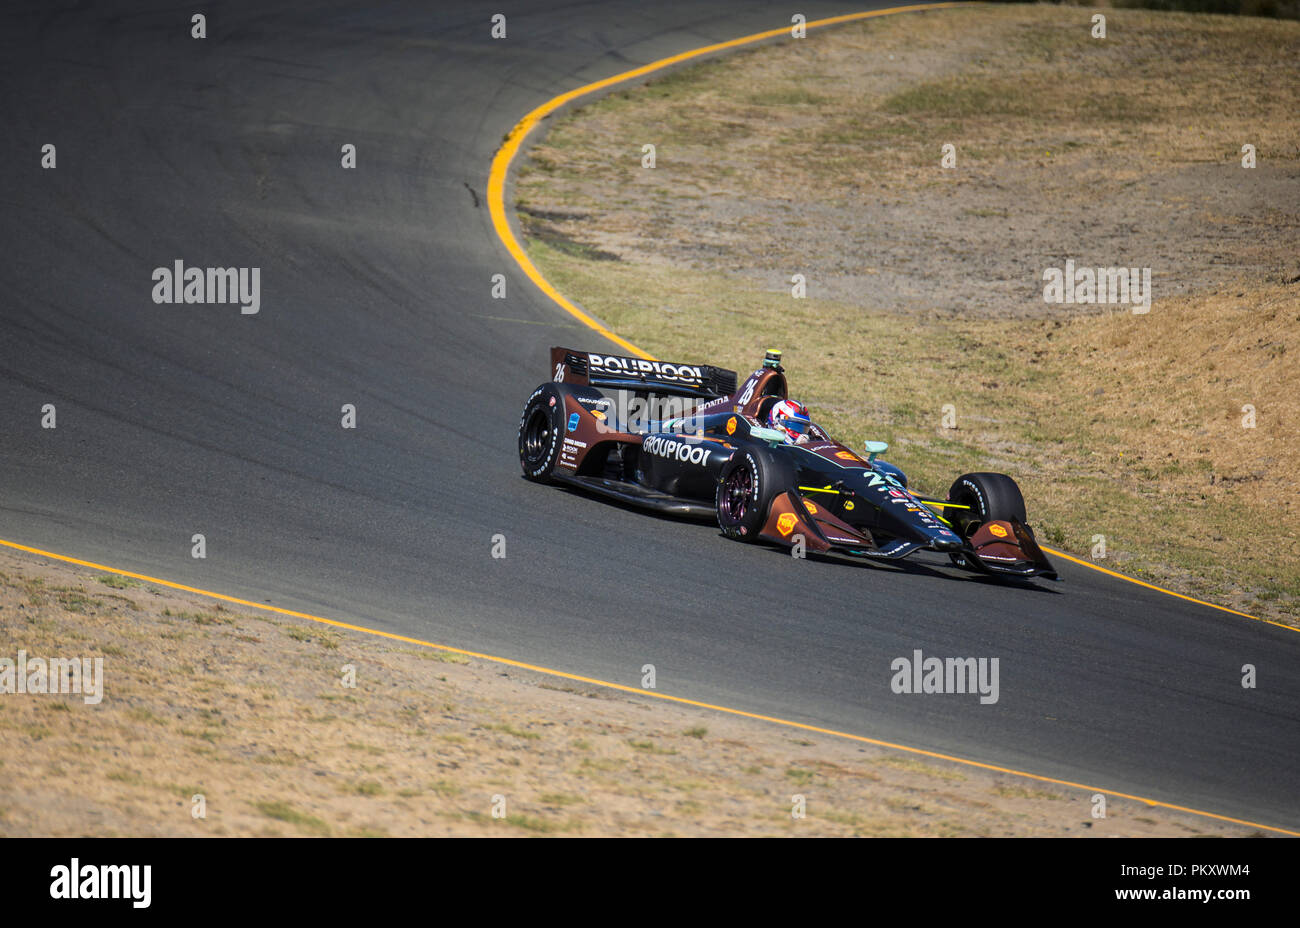 California, USA. 15th Sep, 2018. A : Andretti Autosport driver Zach Veach (26) of United States coming out of turn 6 during the GoPro Grand Prix of Sonoma Verizon Indycar practice at Sonoma Raceway Sonoma, CA Thurman James/CSM/Alamy Live News Stock Photo